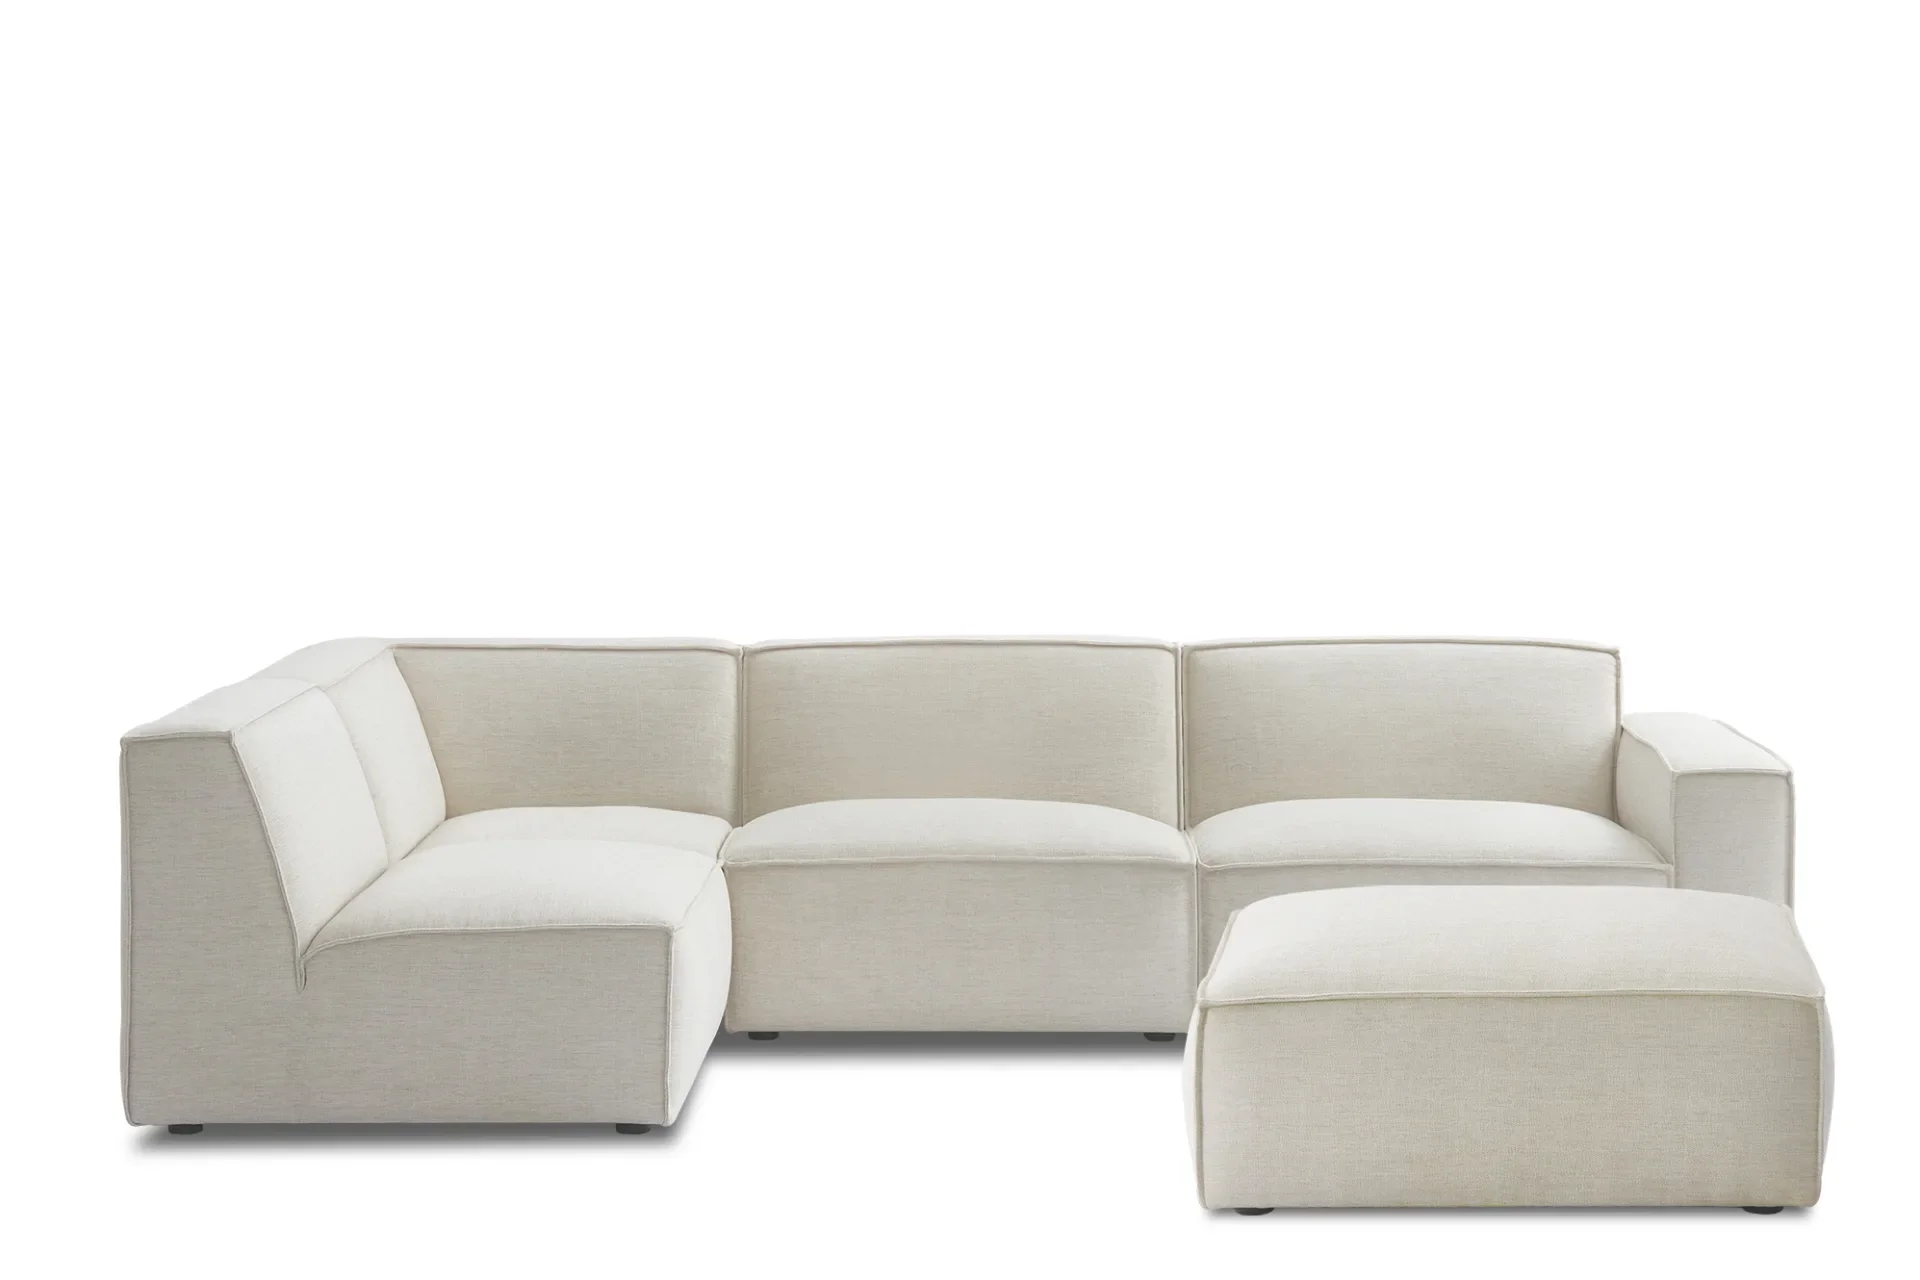 Castlery Owen Chaise Sectional Review 2023